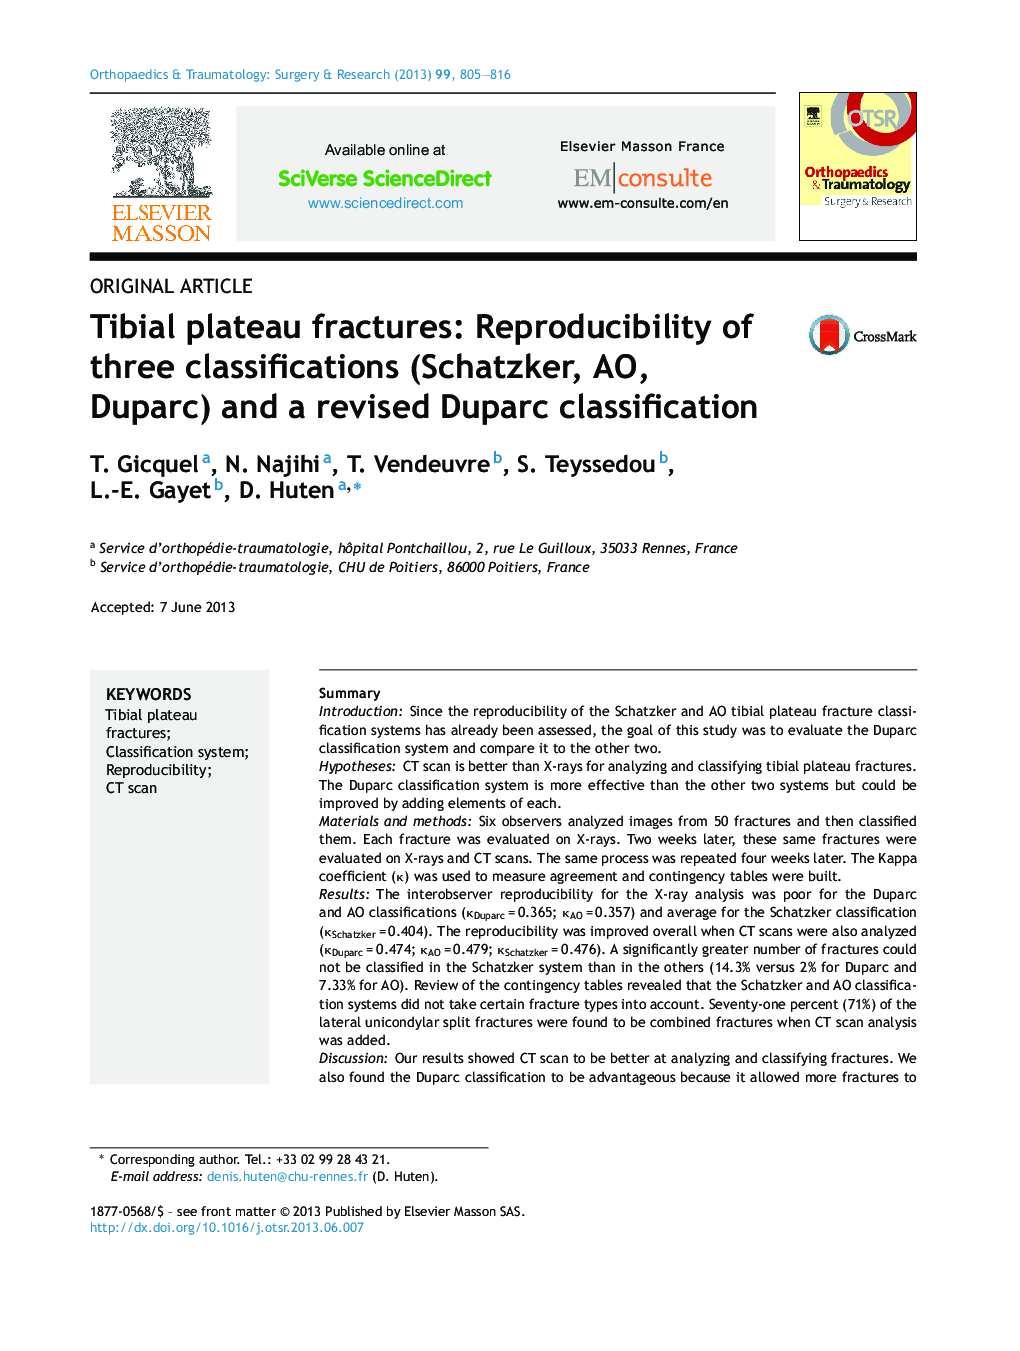 Tibial plateau fractures: Reproducibility of three classifications (Schatzker, AO, Duparc) and a revised Duparc classification